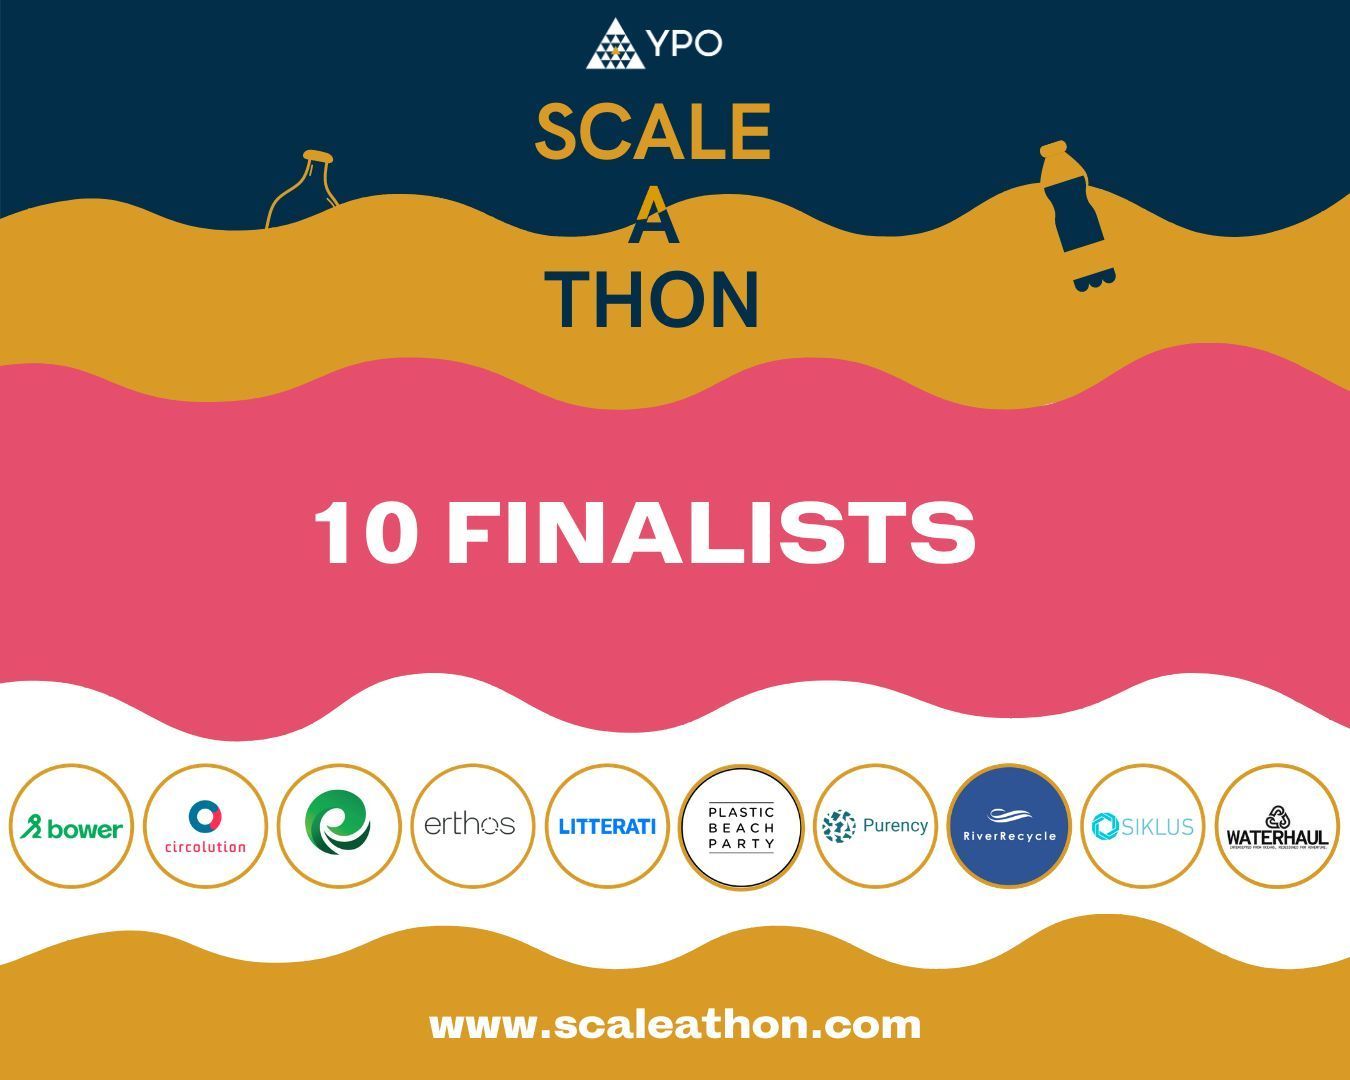 Purency among the 10 Finalists for YPO Scale-A-Thon 2021